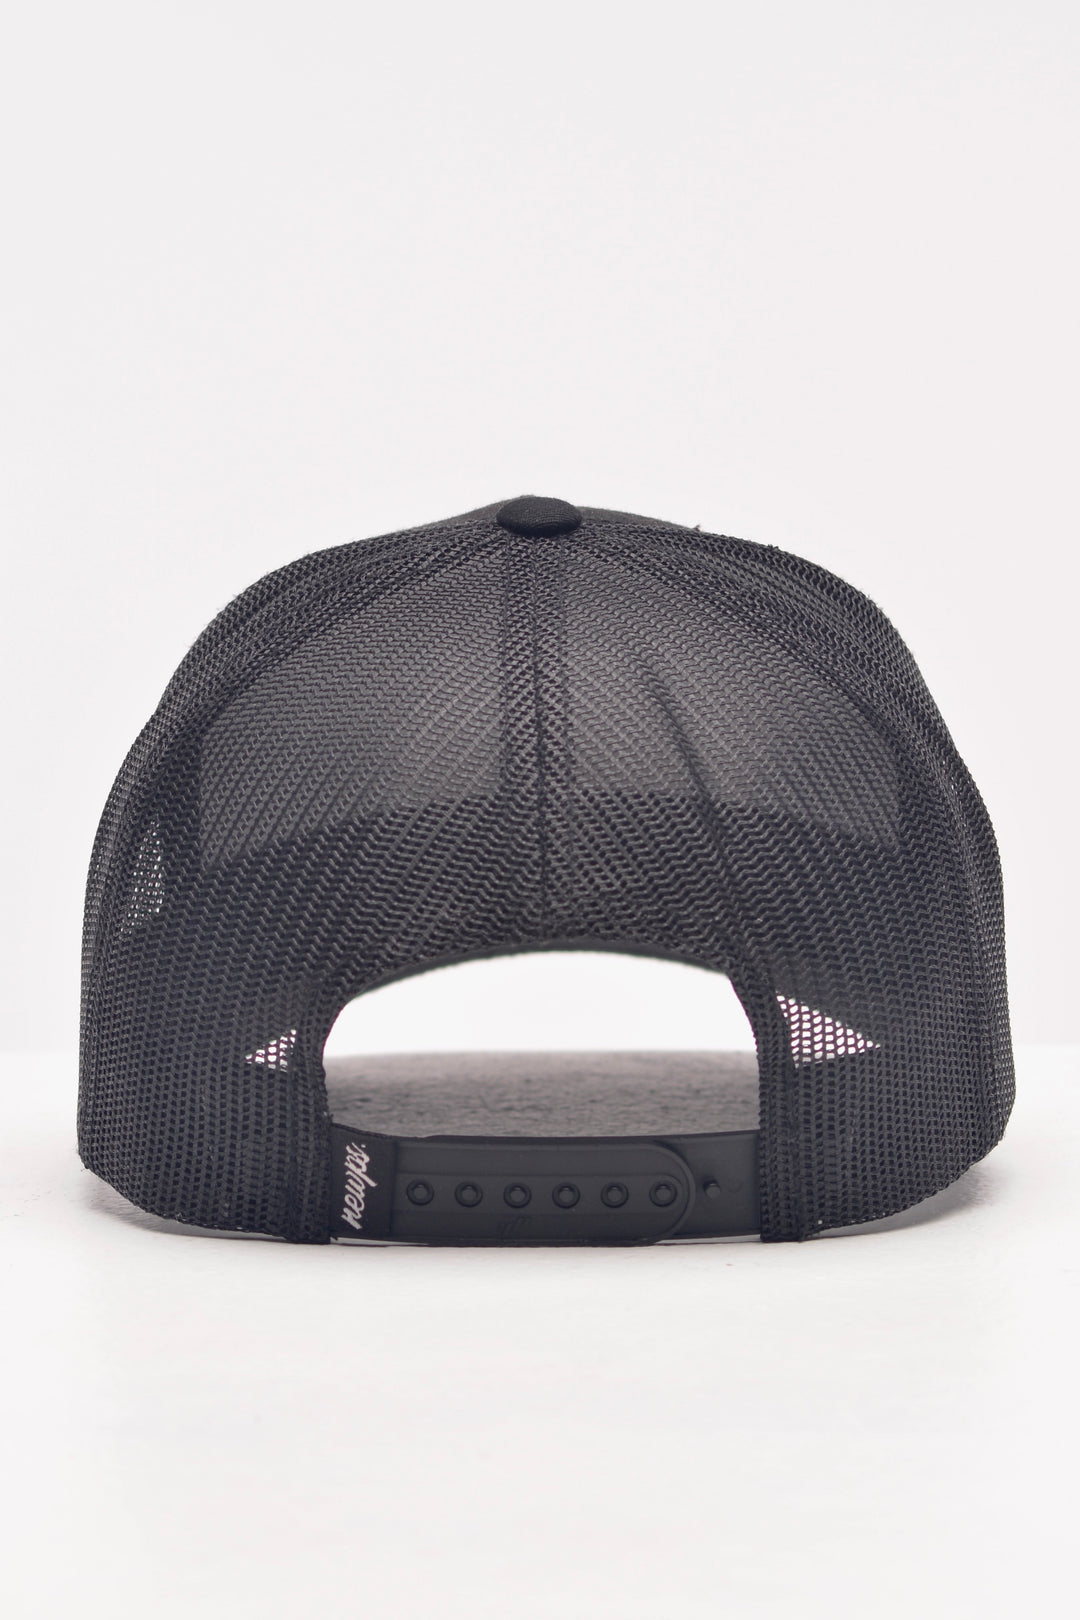 Patch Snapback - Charcoal